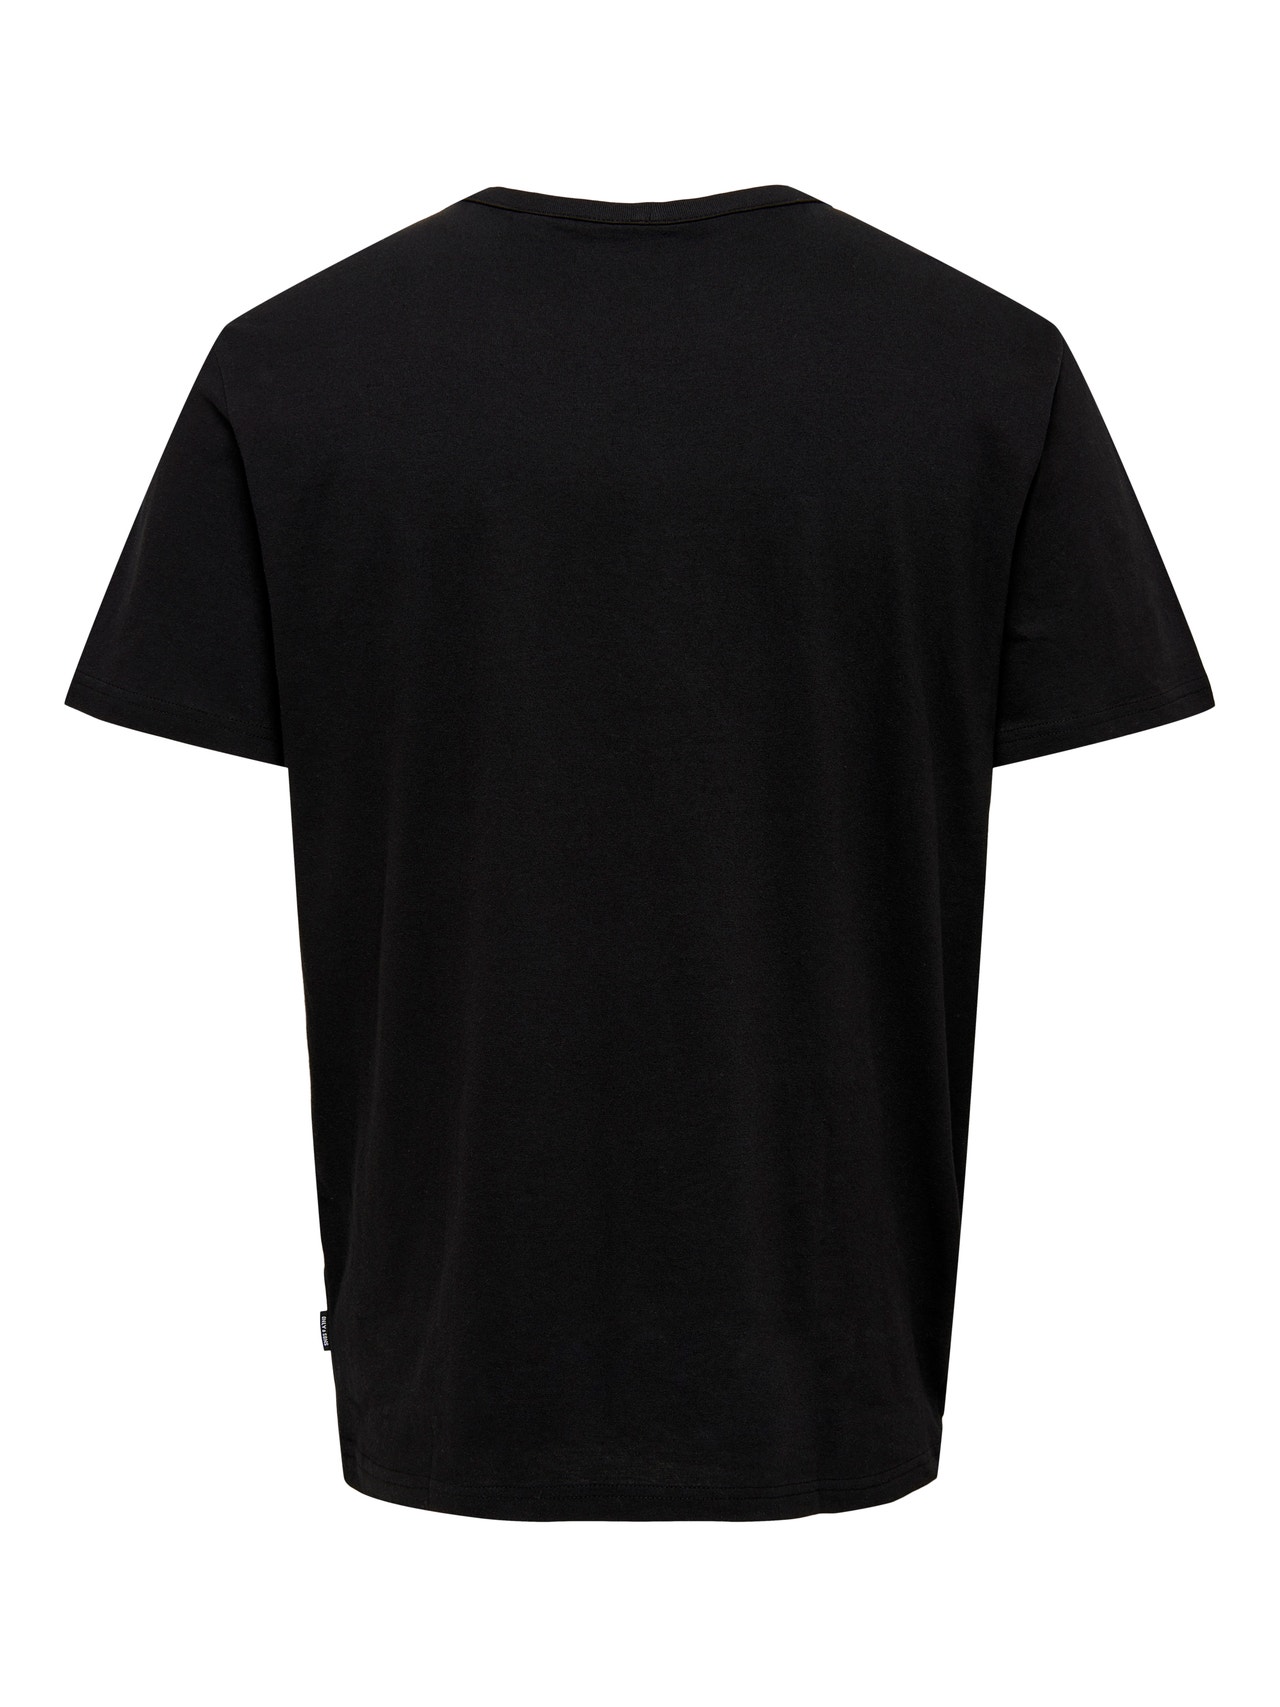 ONLY & SONS Regular Fit Round Neck T-Shirt -Black - 22026378